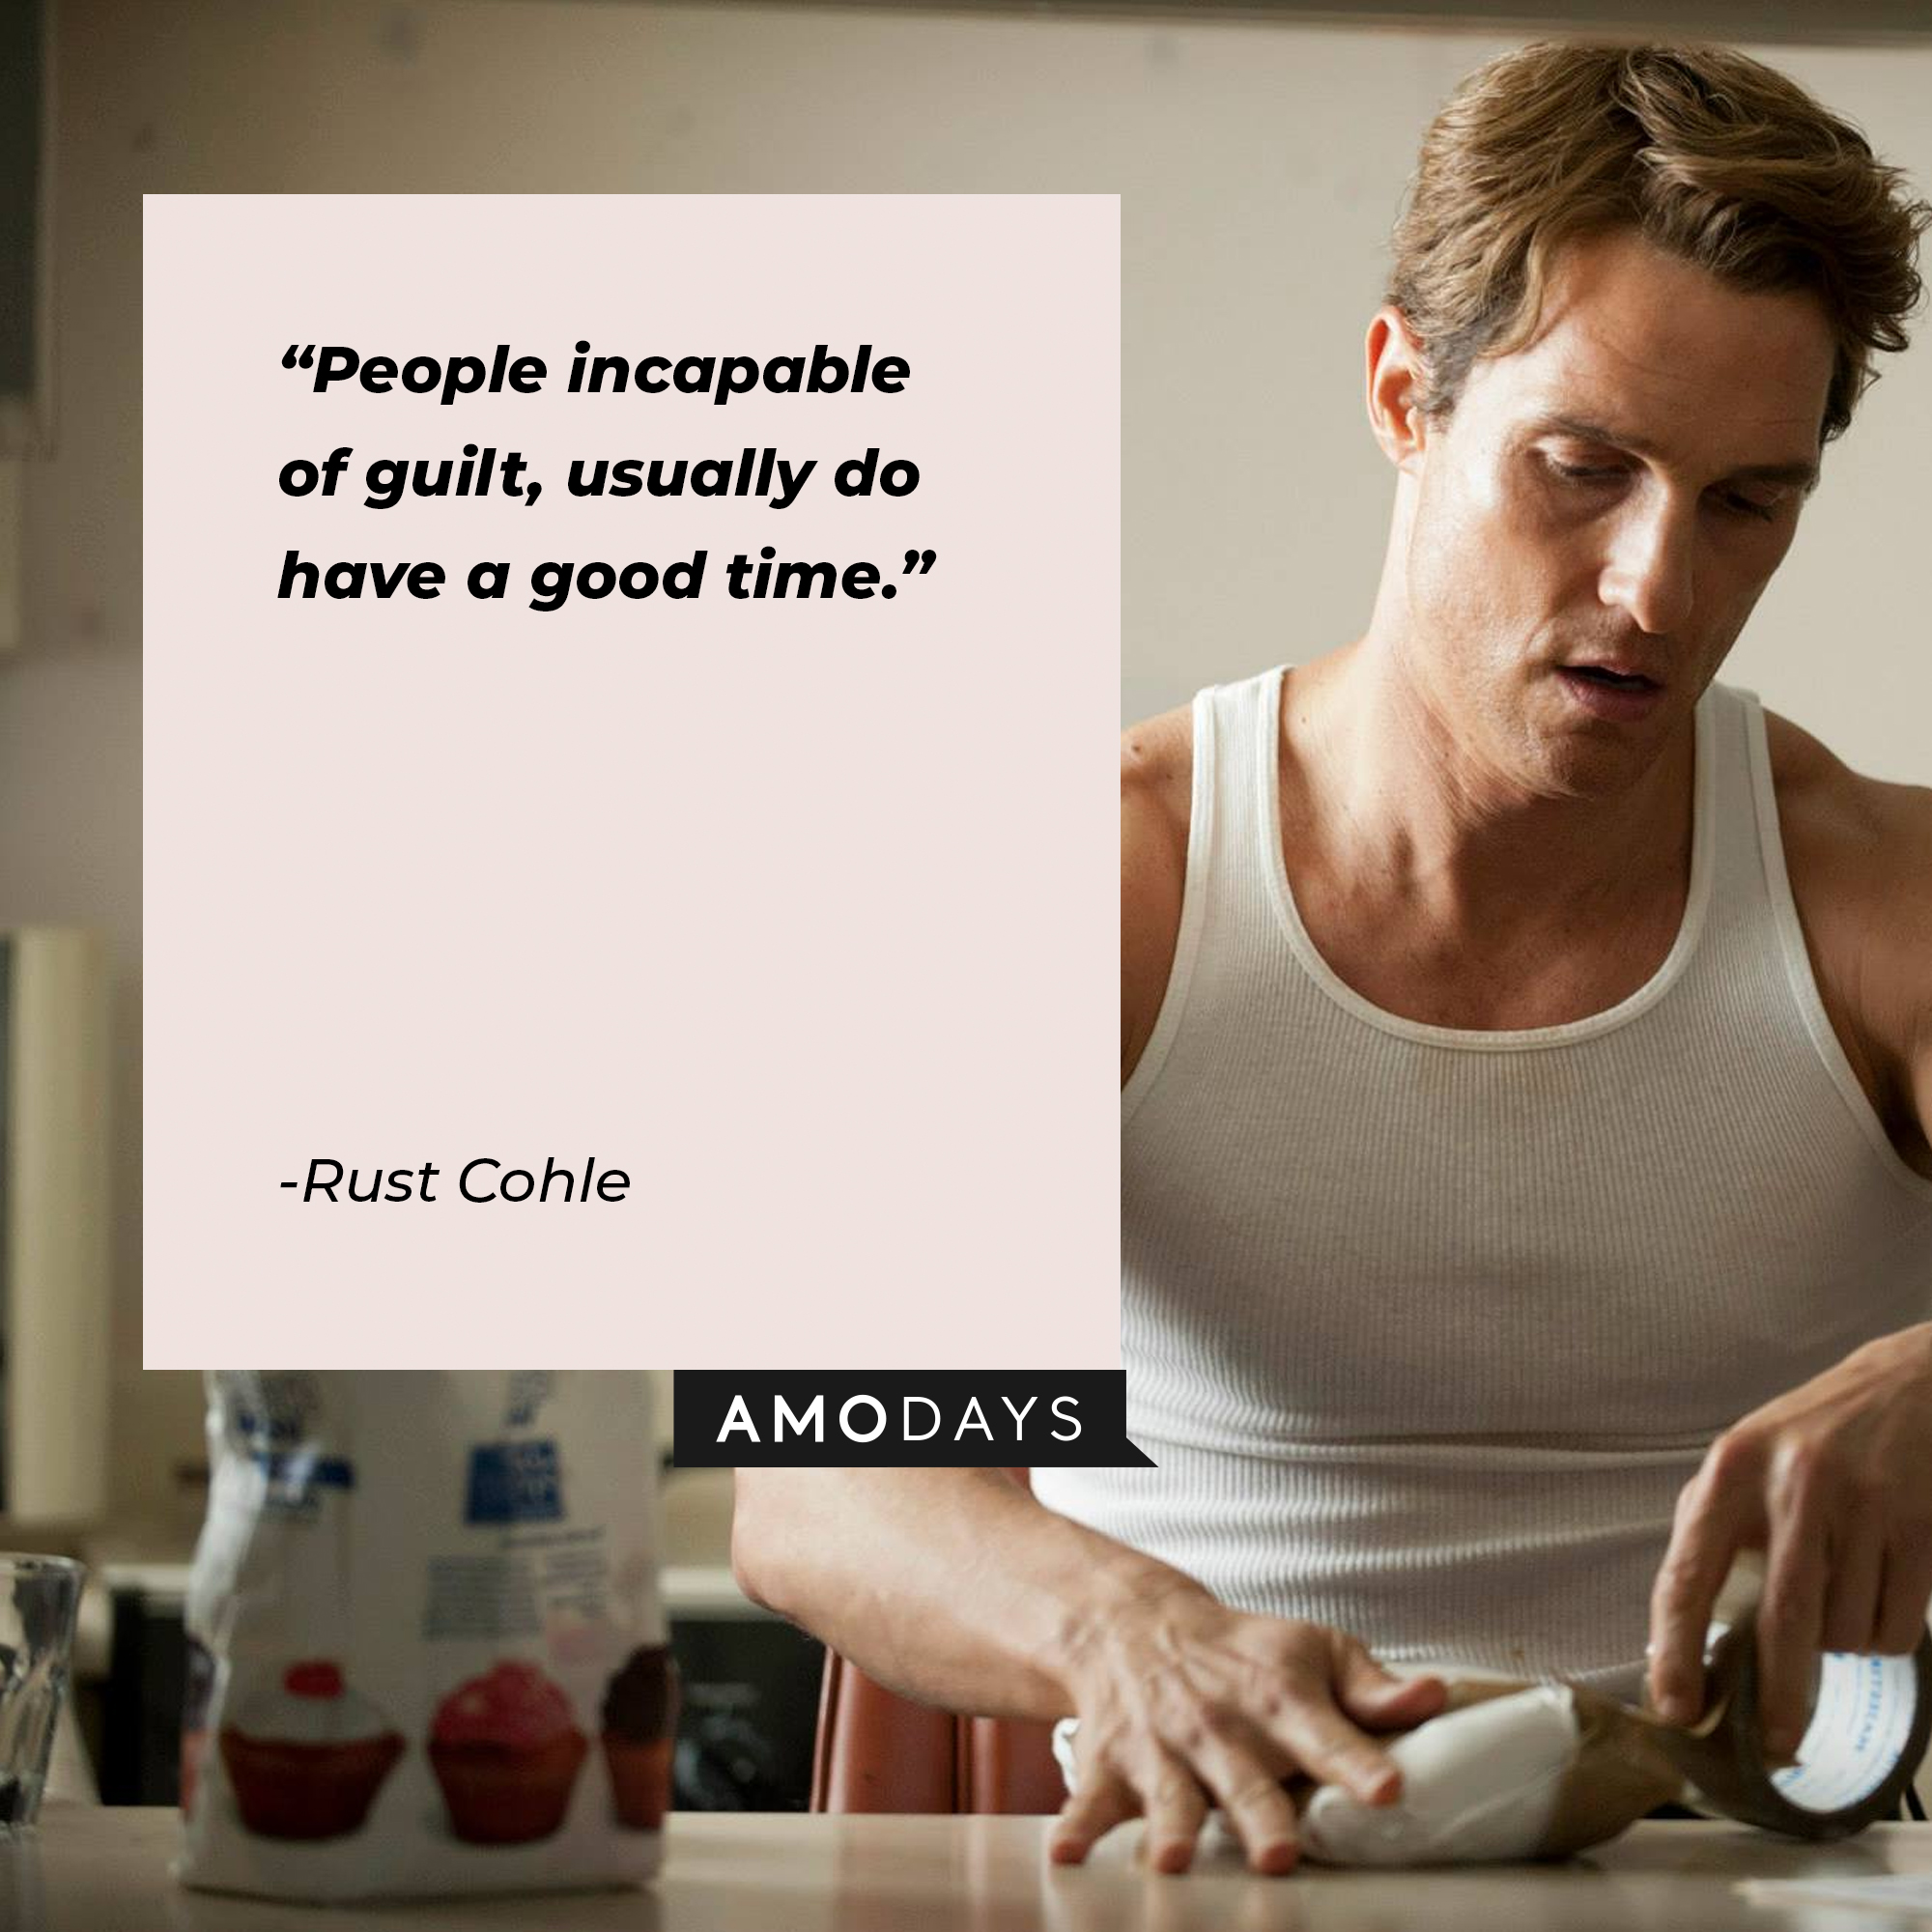 A photo of Rust Cohle with the quote, "People incapable of guilt, usually do have a good time." | Source: Facebook/TrueDetective